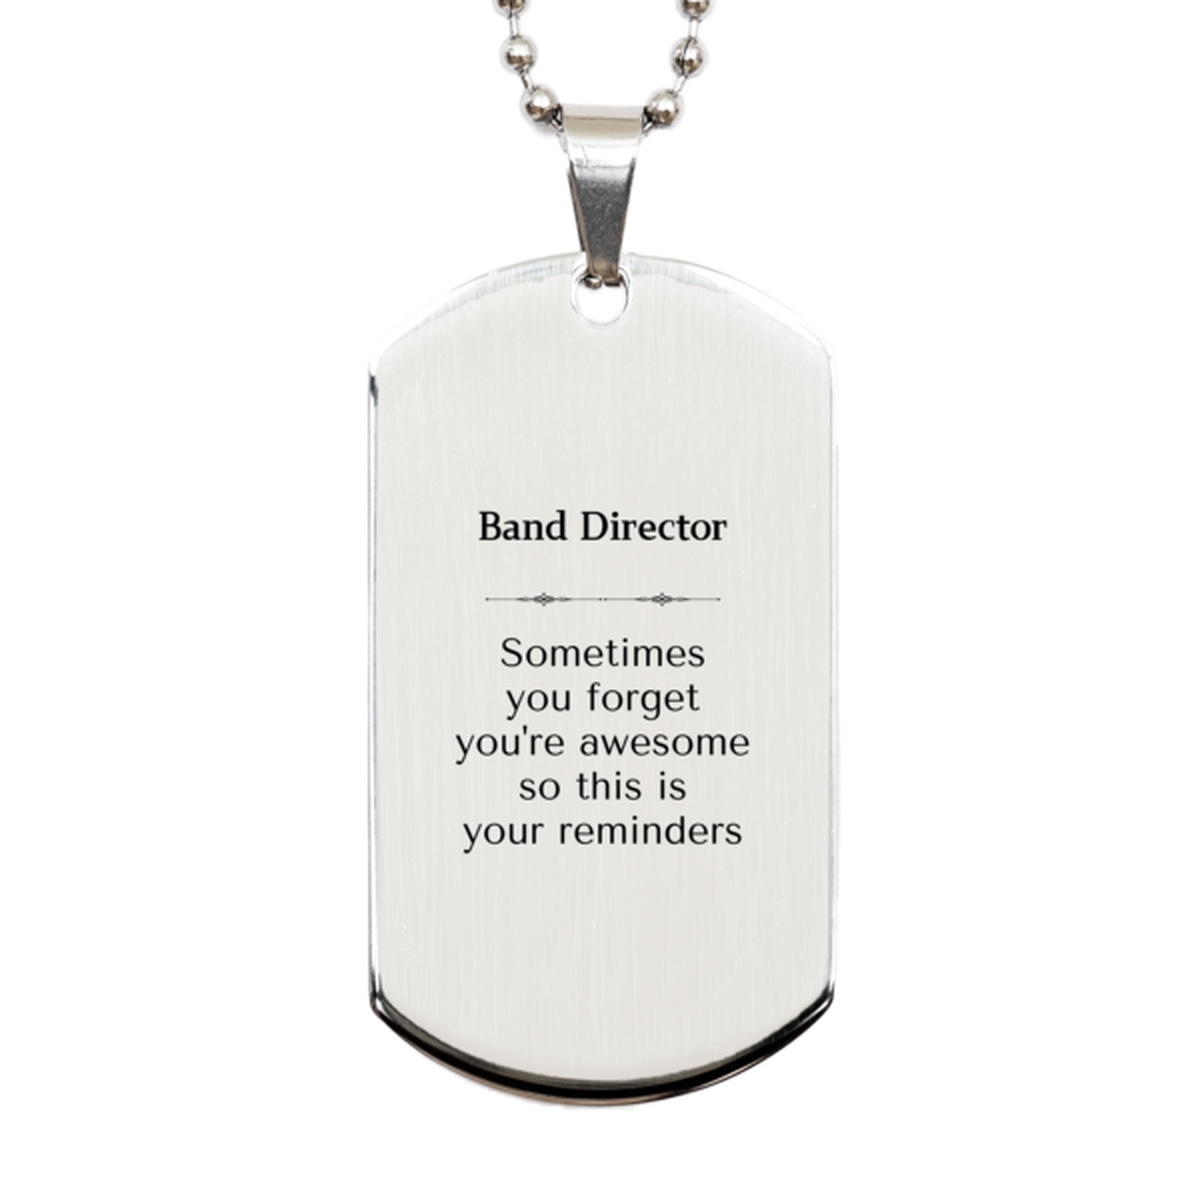 Sentimental Band Director Silver Dog Tag, Band Director Sometimes you forget you're awesome so this is your reminders, Graduation Christmas Birthday Gifts for Band Director, Men, Women, Coworkers